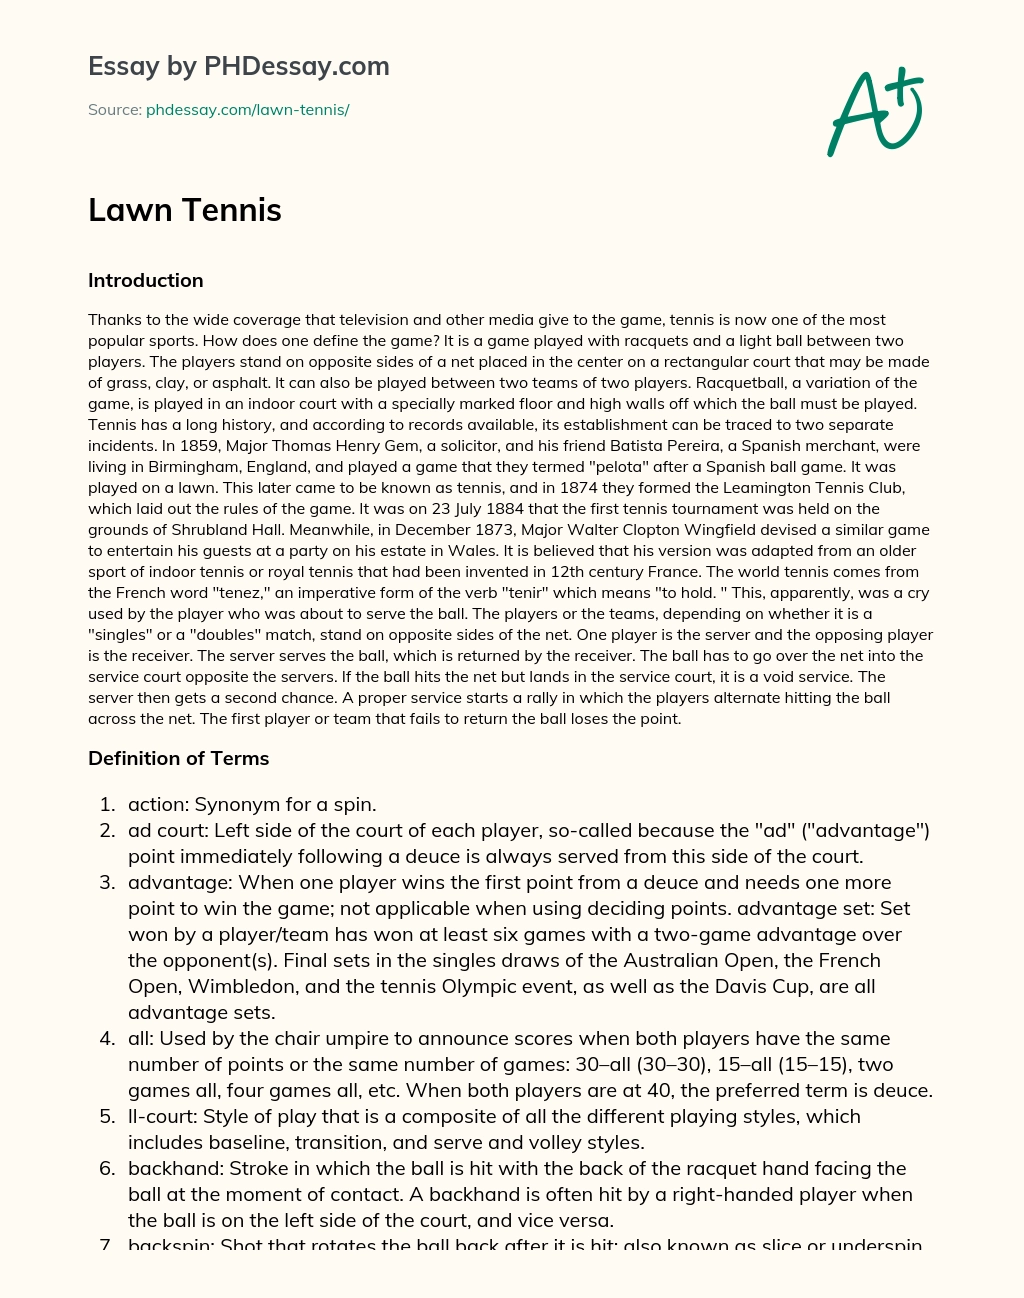 Tennis: A Popular Sport with a Long History essay